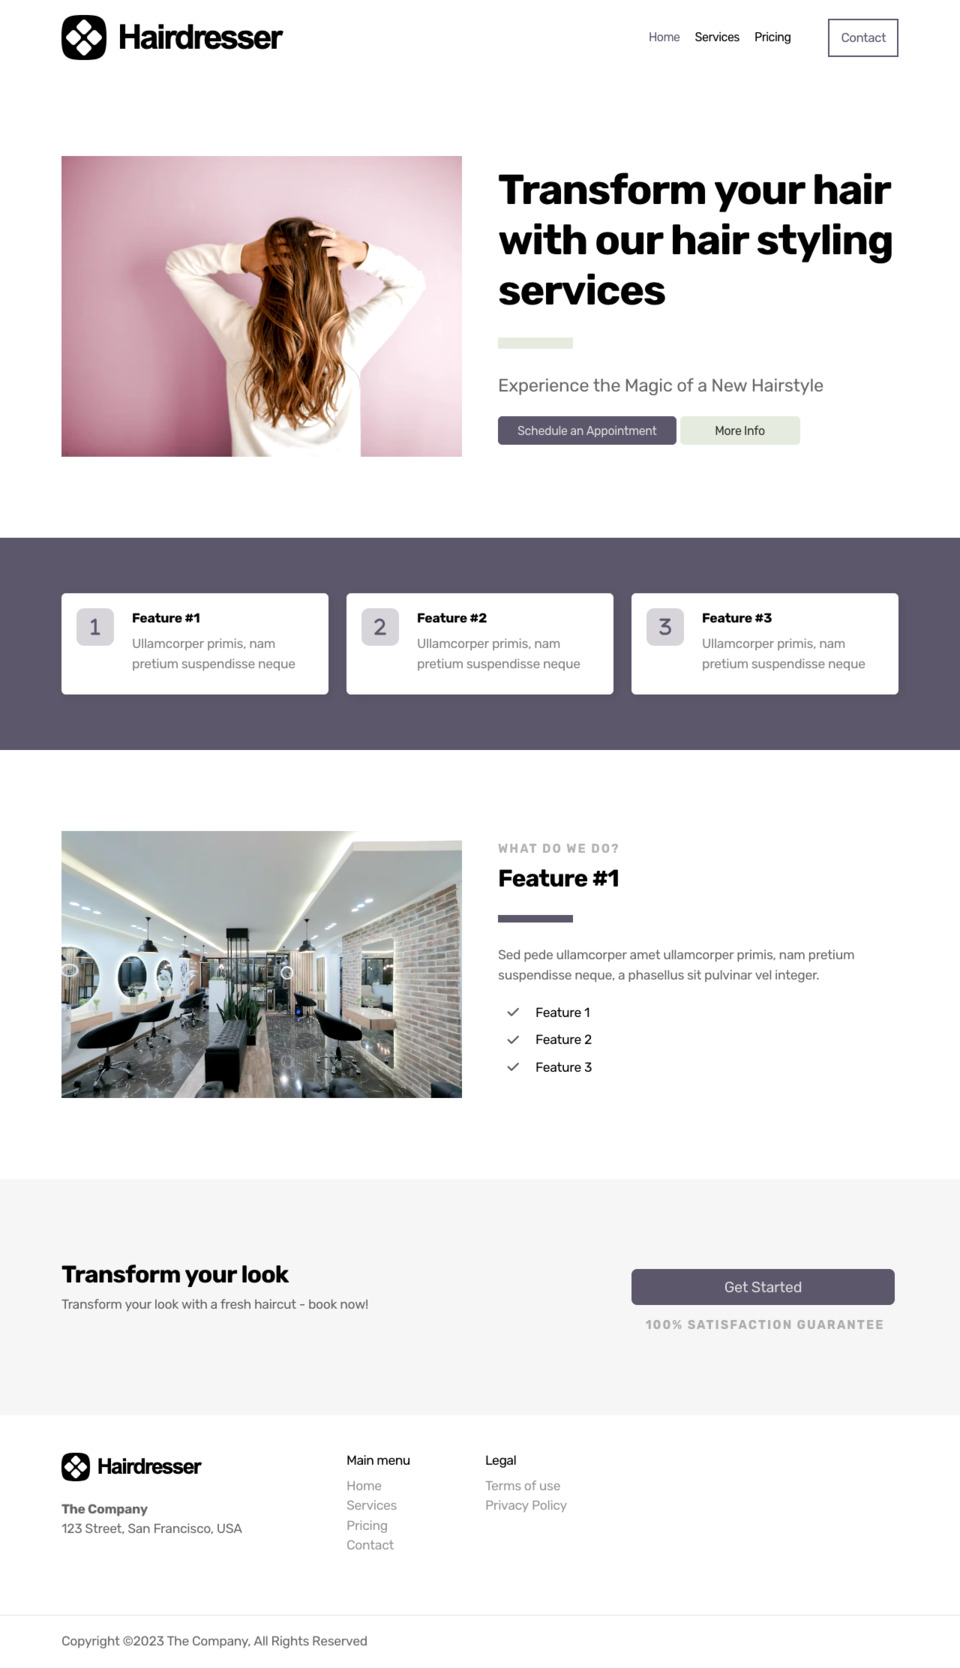 Hair Dresser Website Template - Hair salons, barbers, beauticians, beauty salons, and professional hairstylists